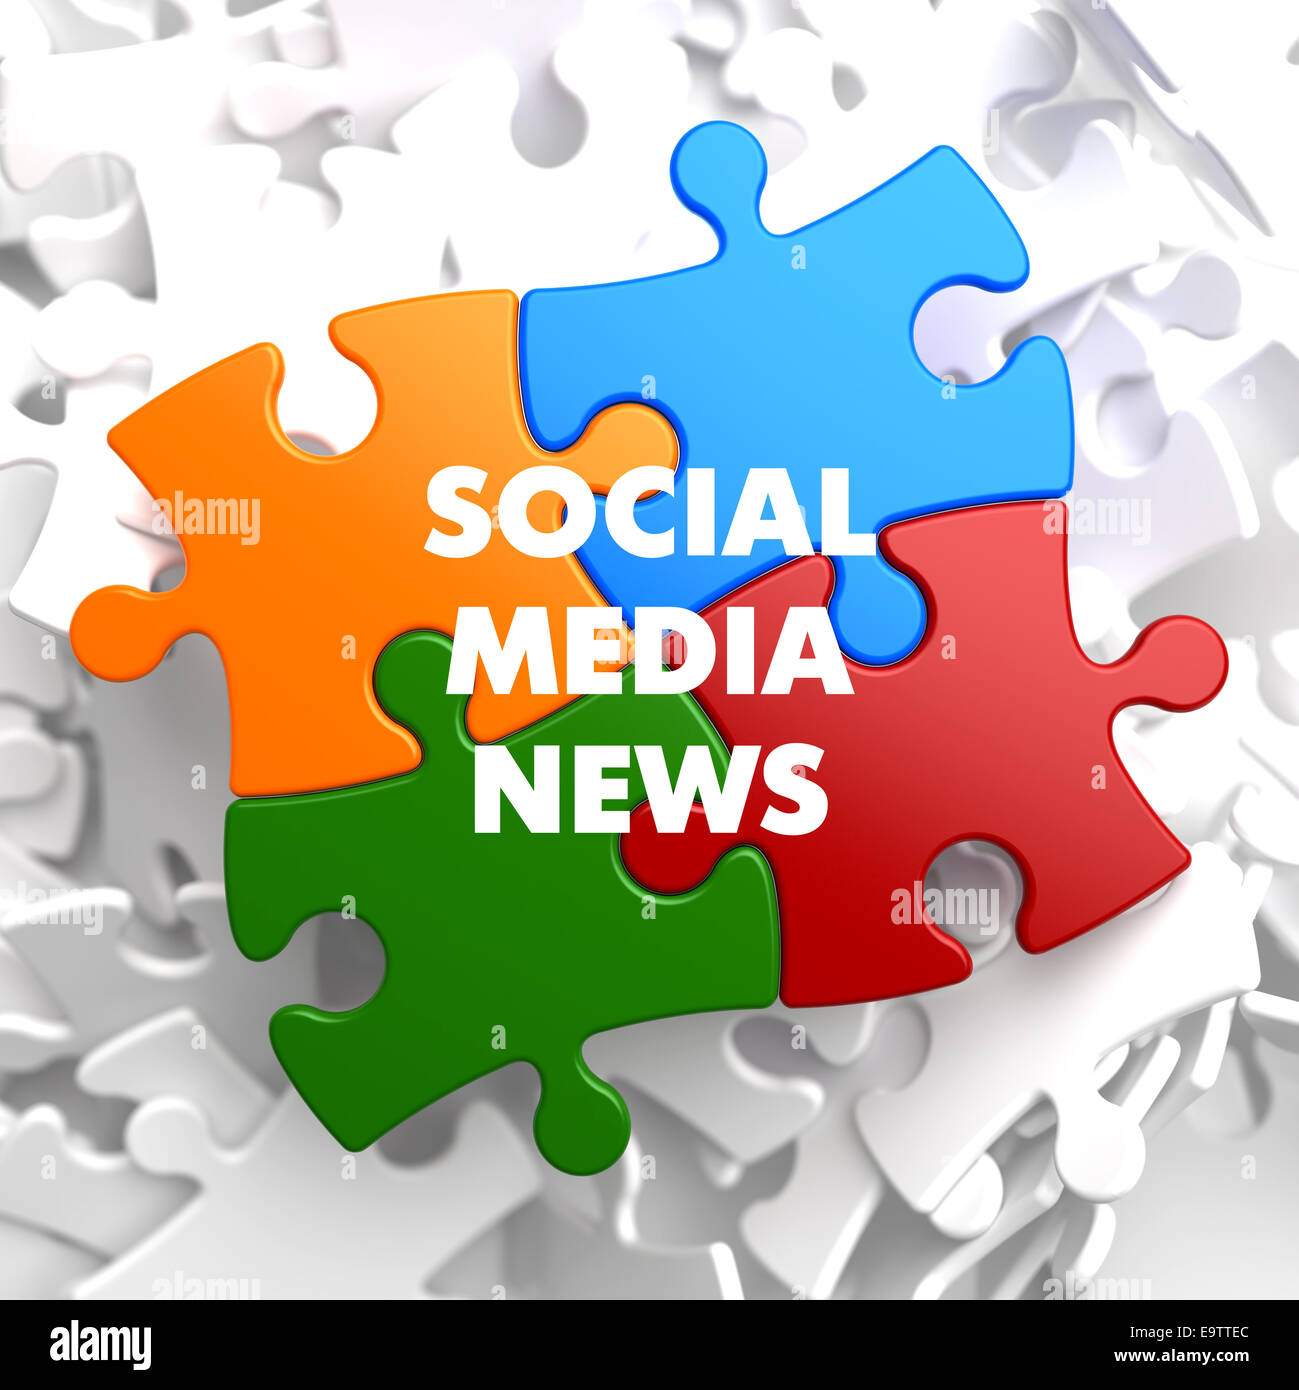 Social Media News on Multicolor Puzzle on White Background. Stock Photo